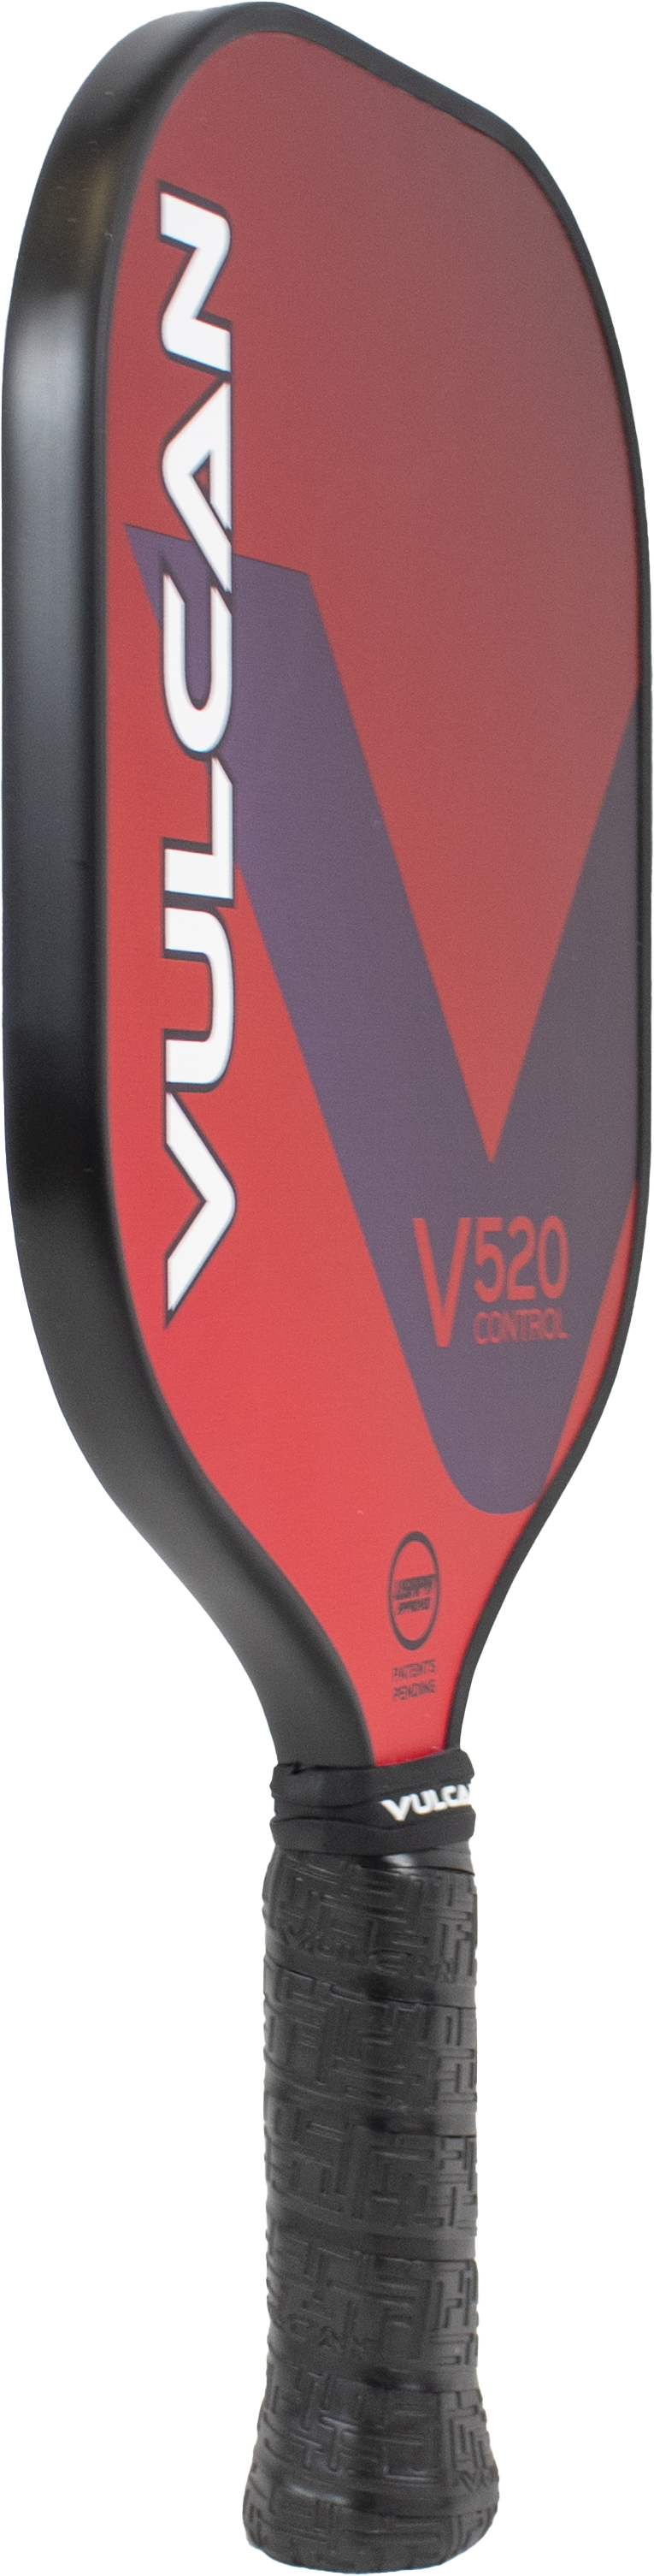 The Vulcan V520 Control Pickleball Paddle by Vulcan is shown on a white background.